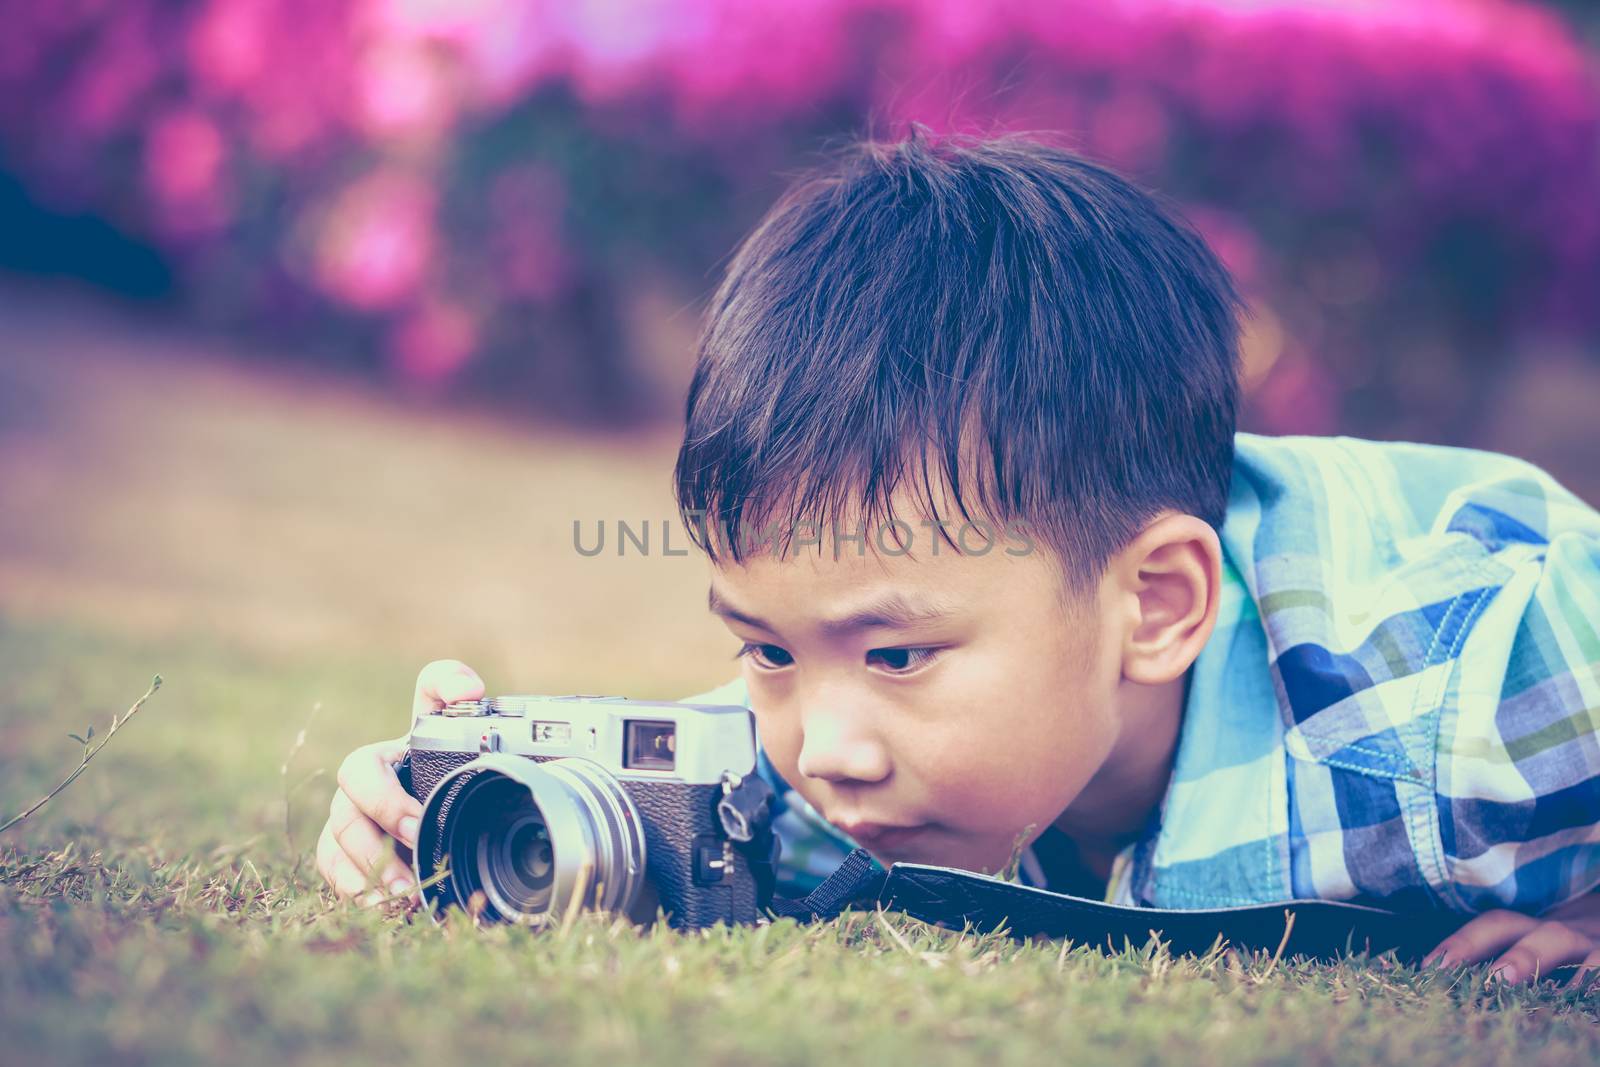 Boy taking photo by camera, exploring nature at park. Adorable c by kdshutterman